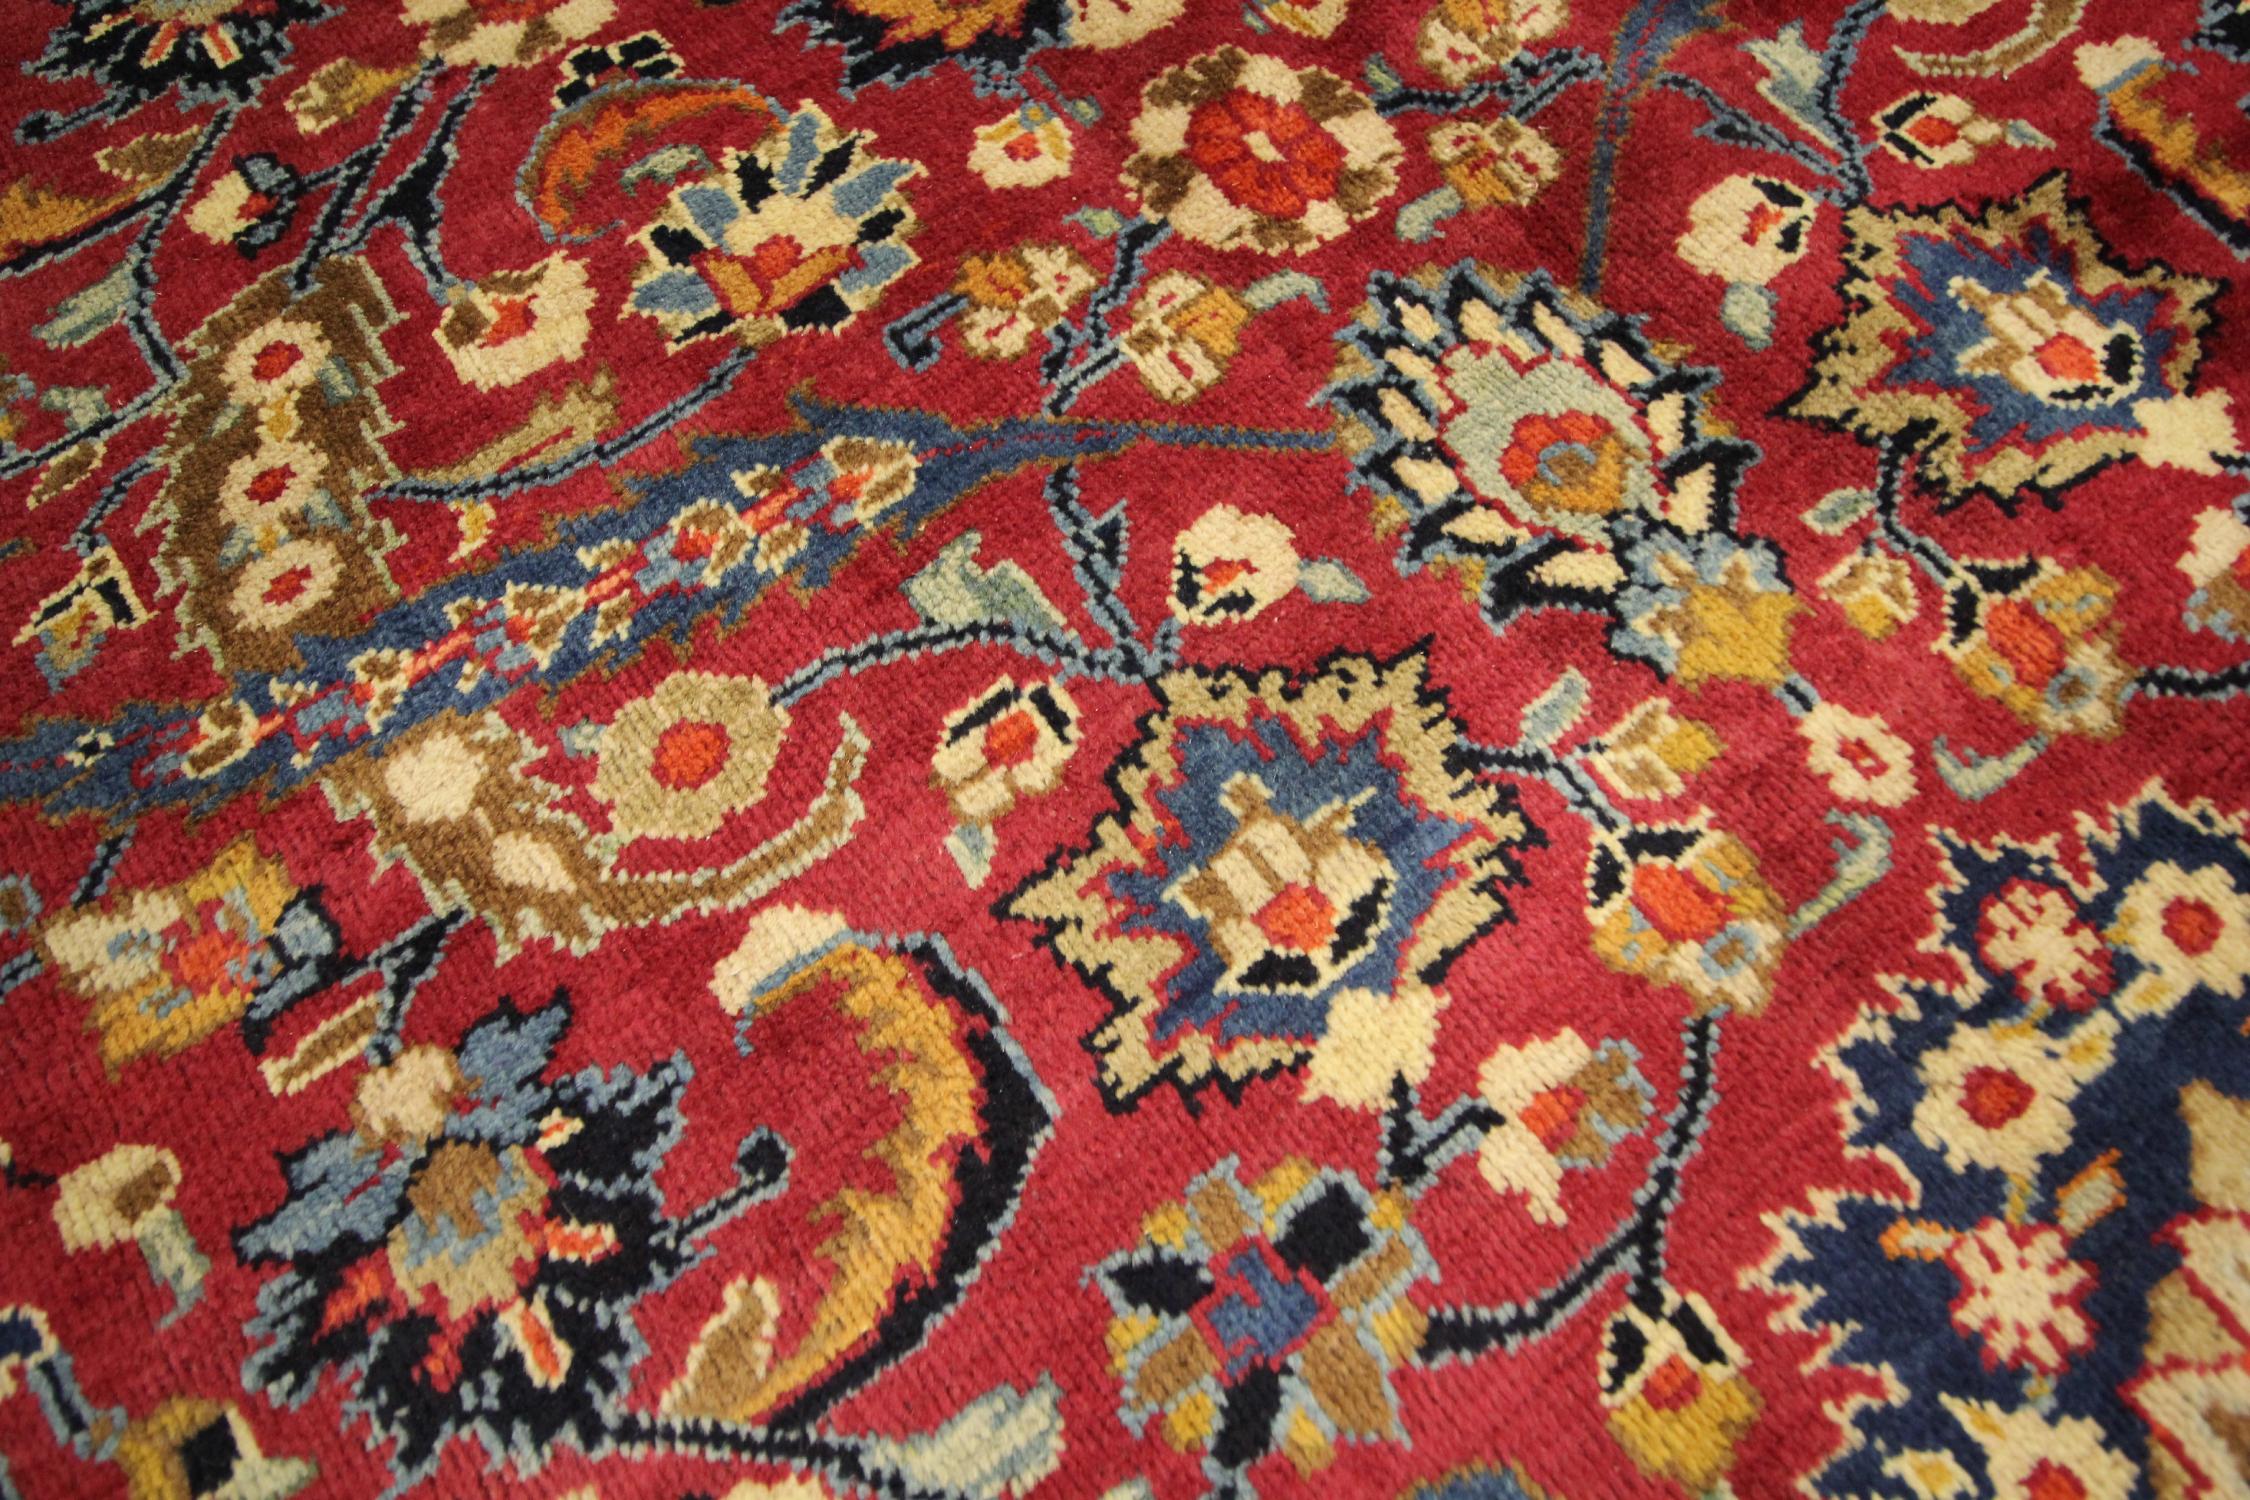 Antique Rugs Crimson Red Handmade Carpet, All over Turkish Rugs for Sale For Sale 7